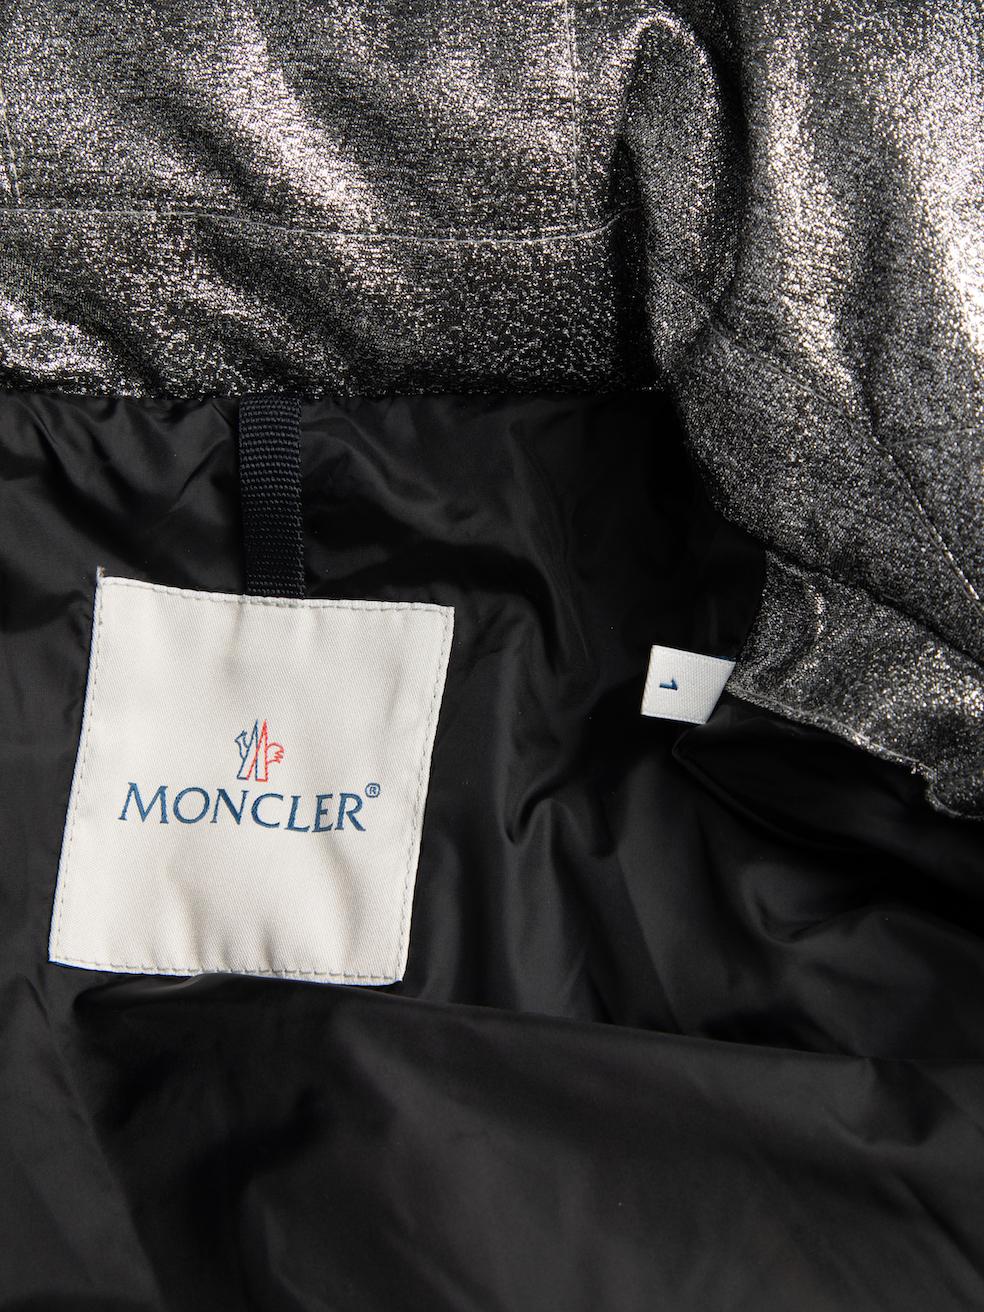 Pre-Loved Moncler Women's Silver Sangly Metallic Quilted Down Jacket